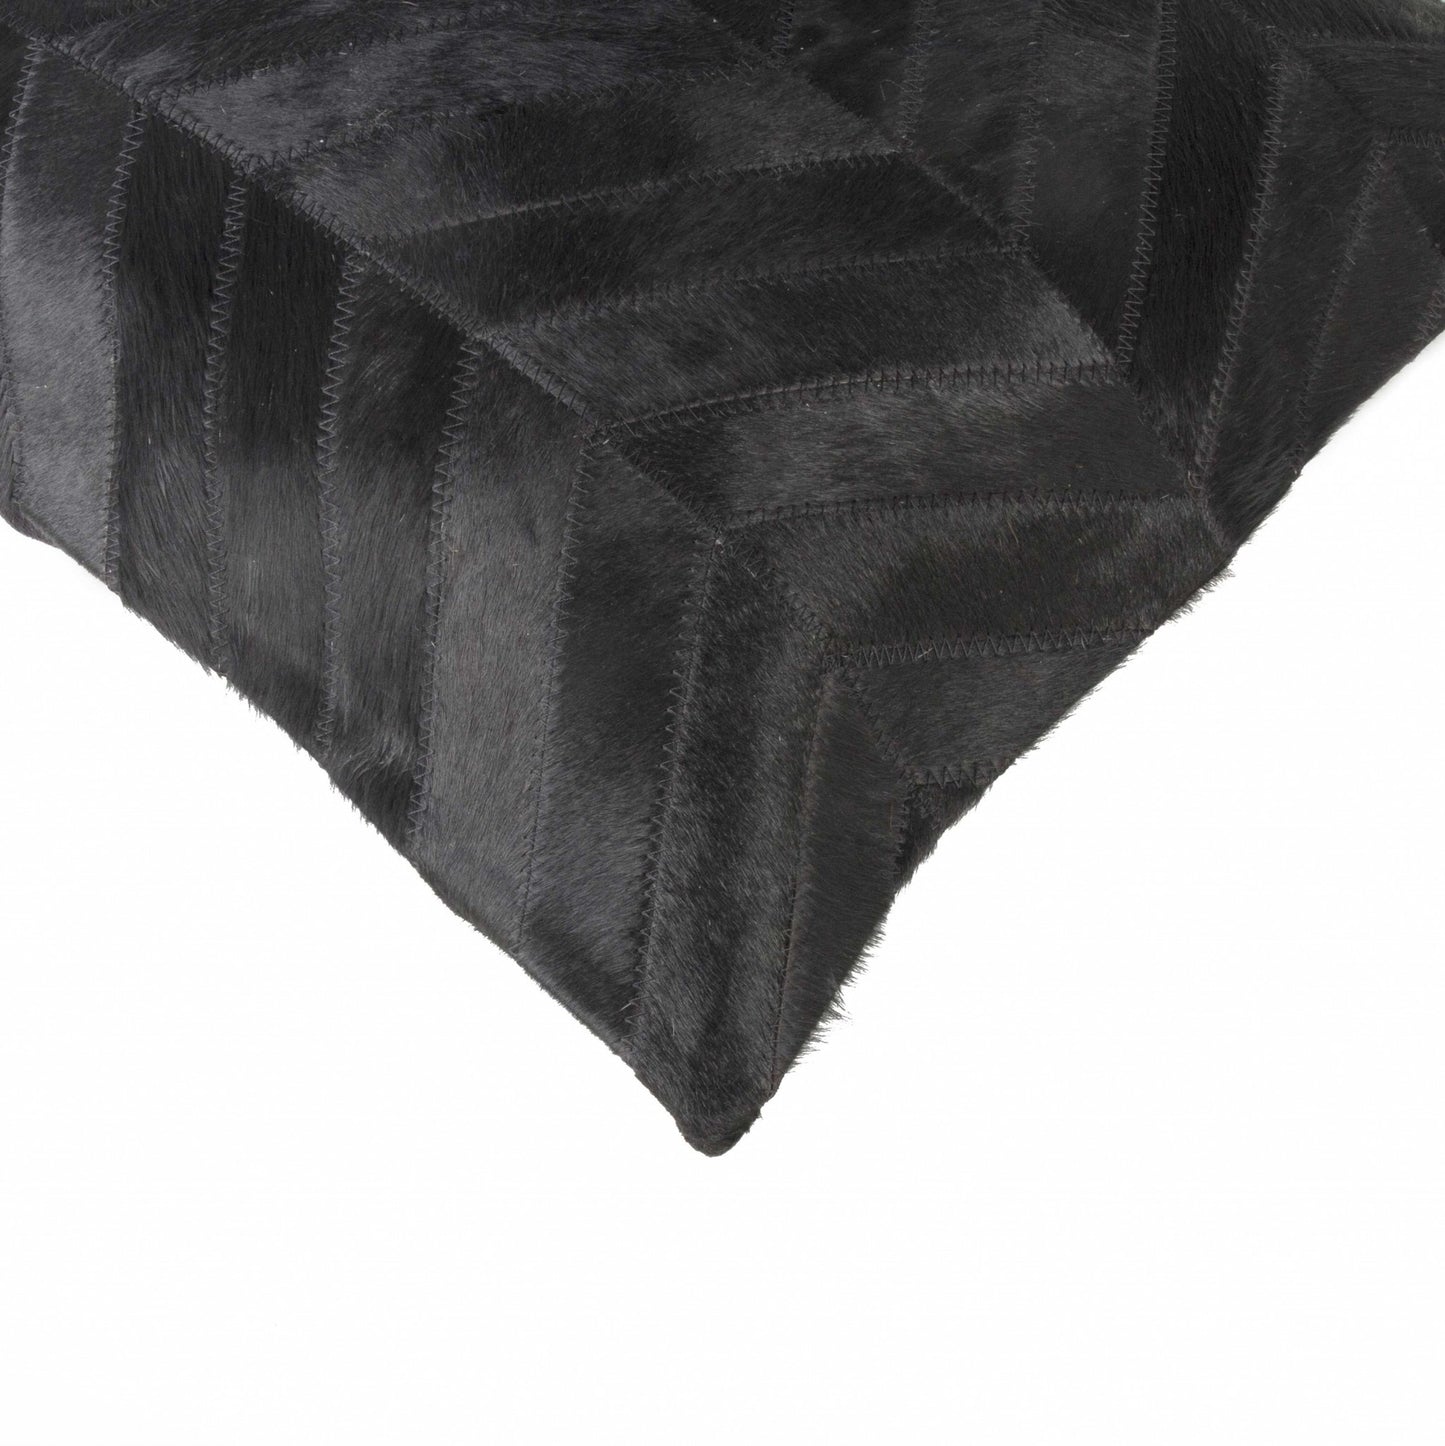 18" X 18" X 5" Black And Natural  Pillow